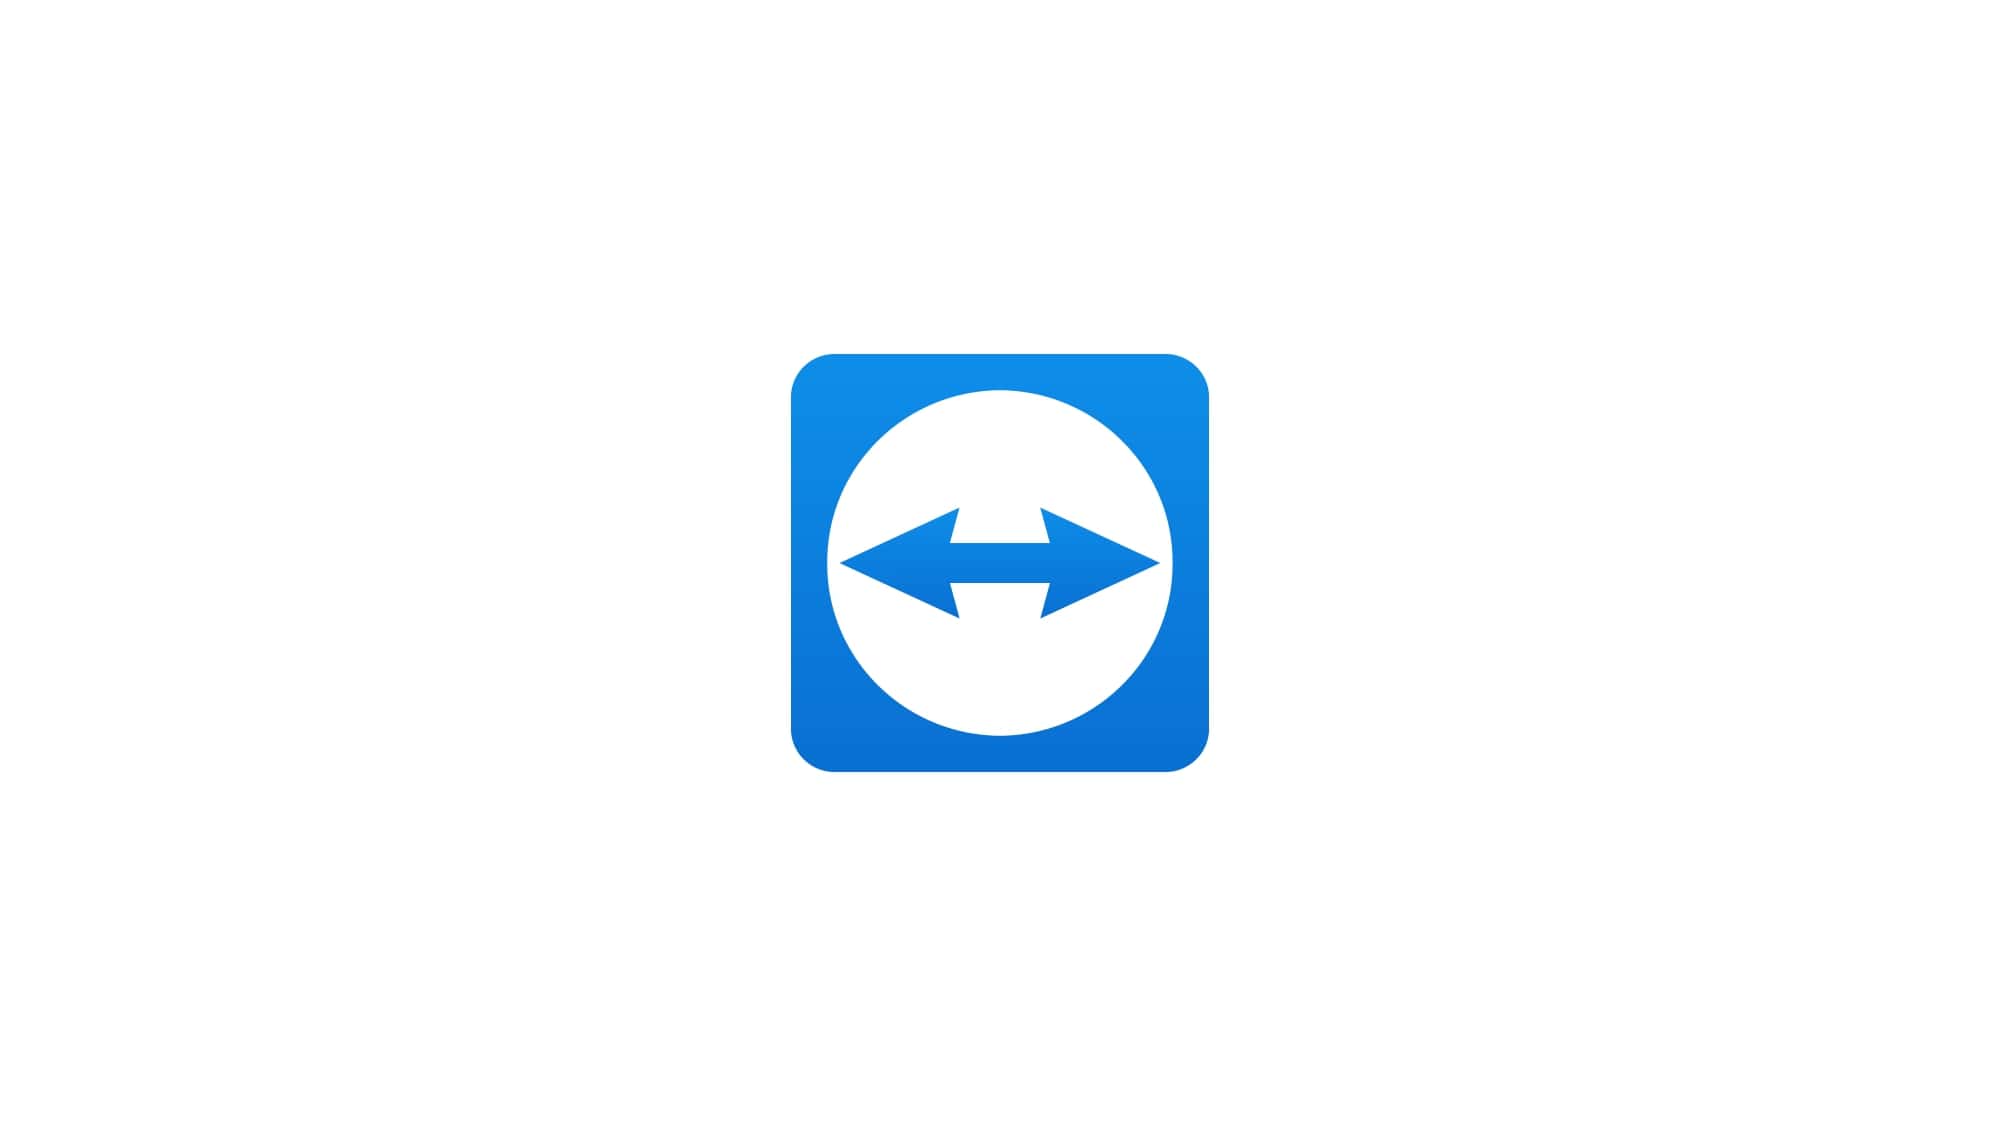 teamviewer 14 compatibility with debian 10